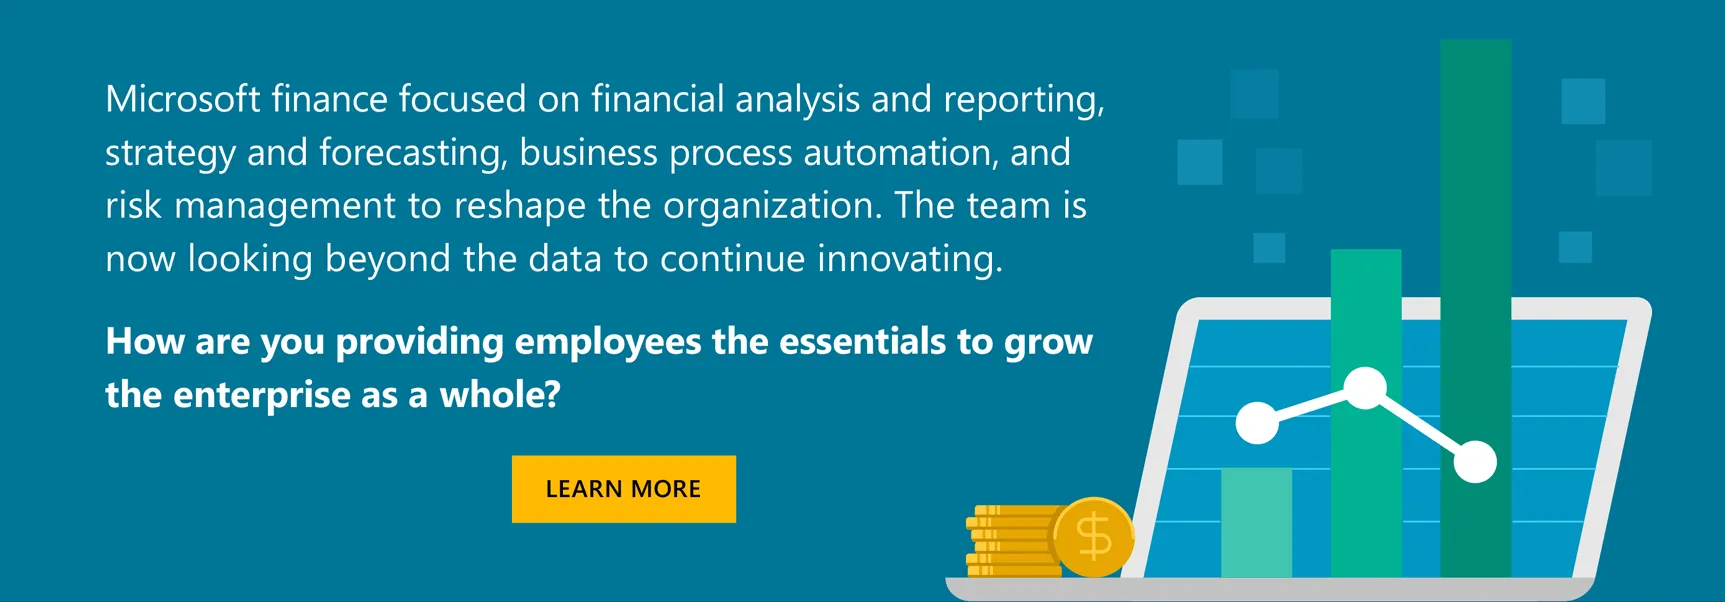 How are you providing employees the essentials to grow the enterprise as a whole? Learn More.